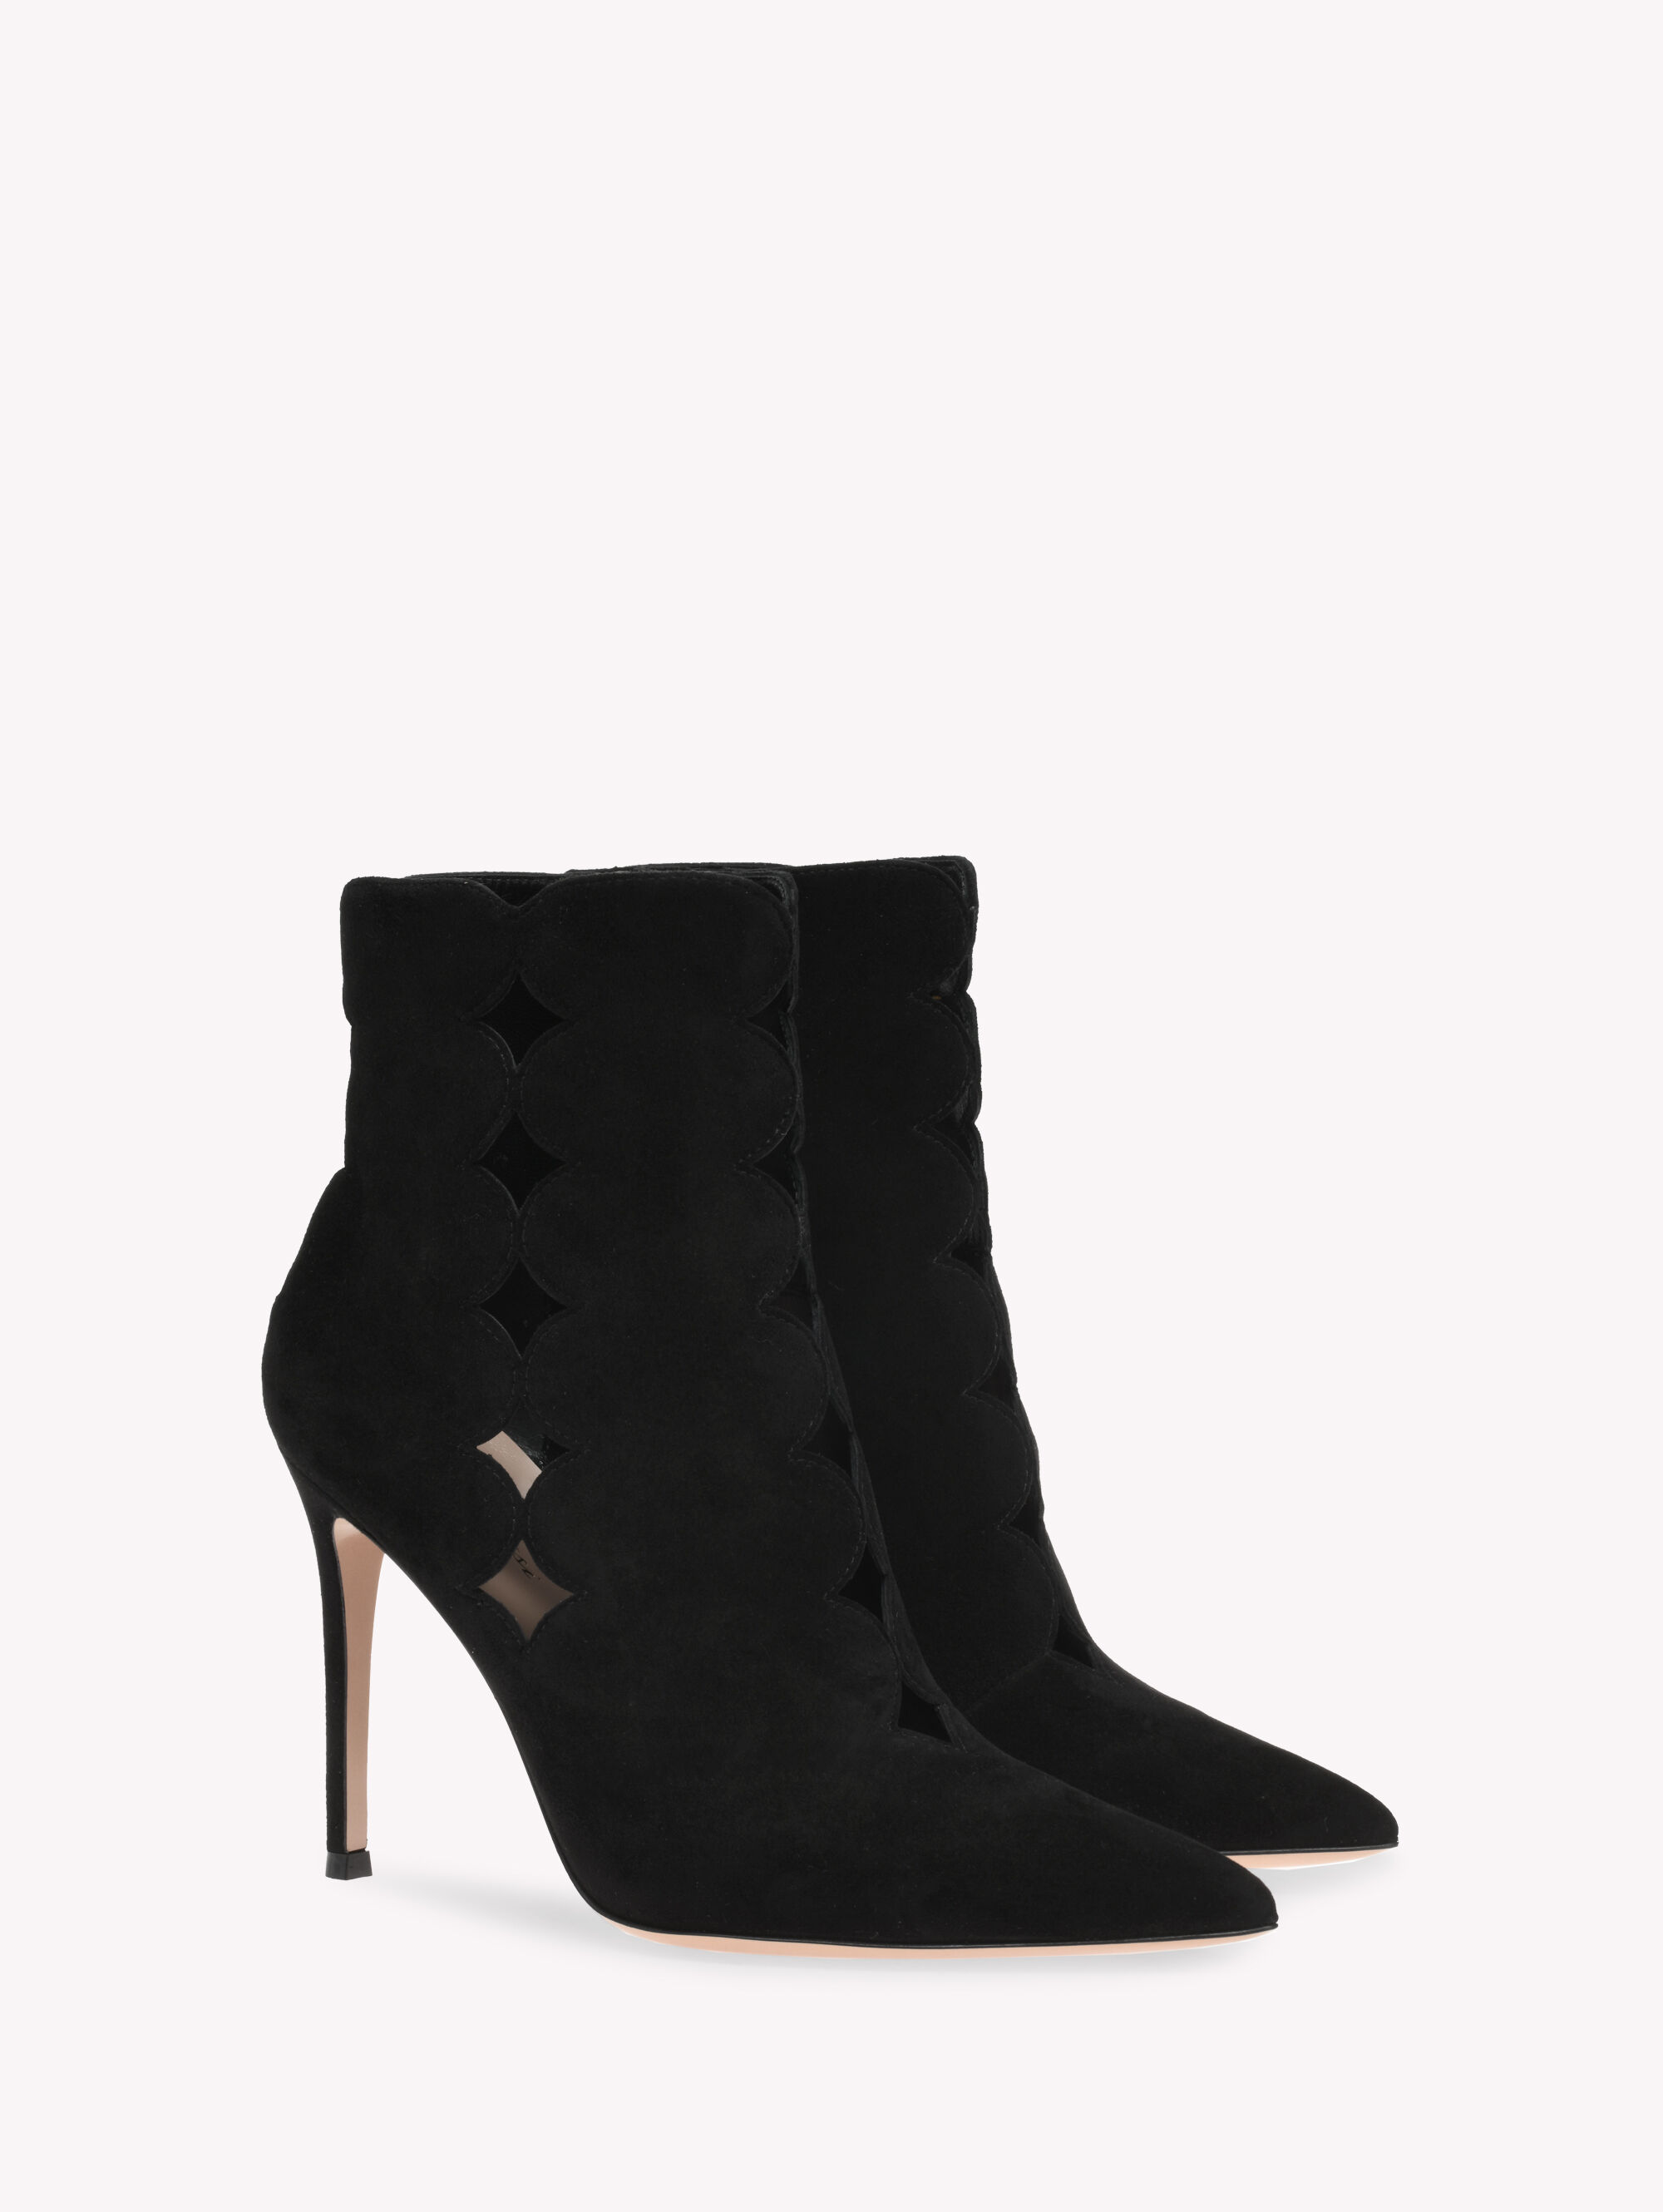 Ankle Boots for Women ARIANA | Gianvito Rossi